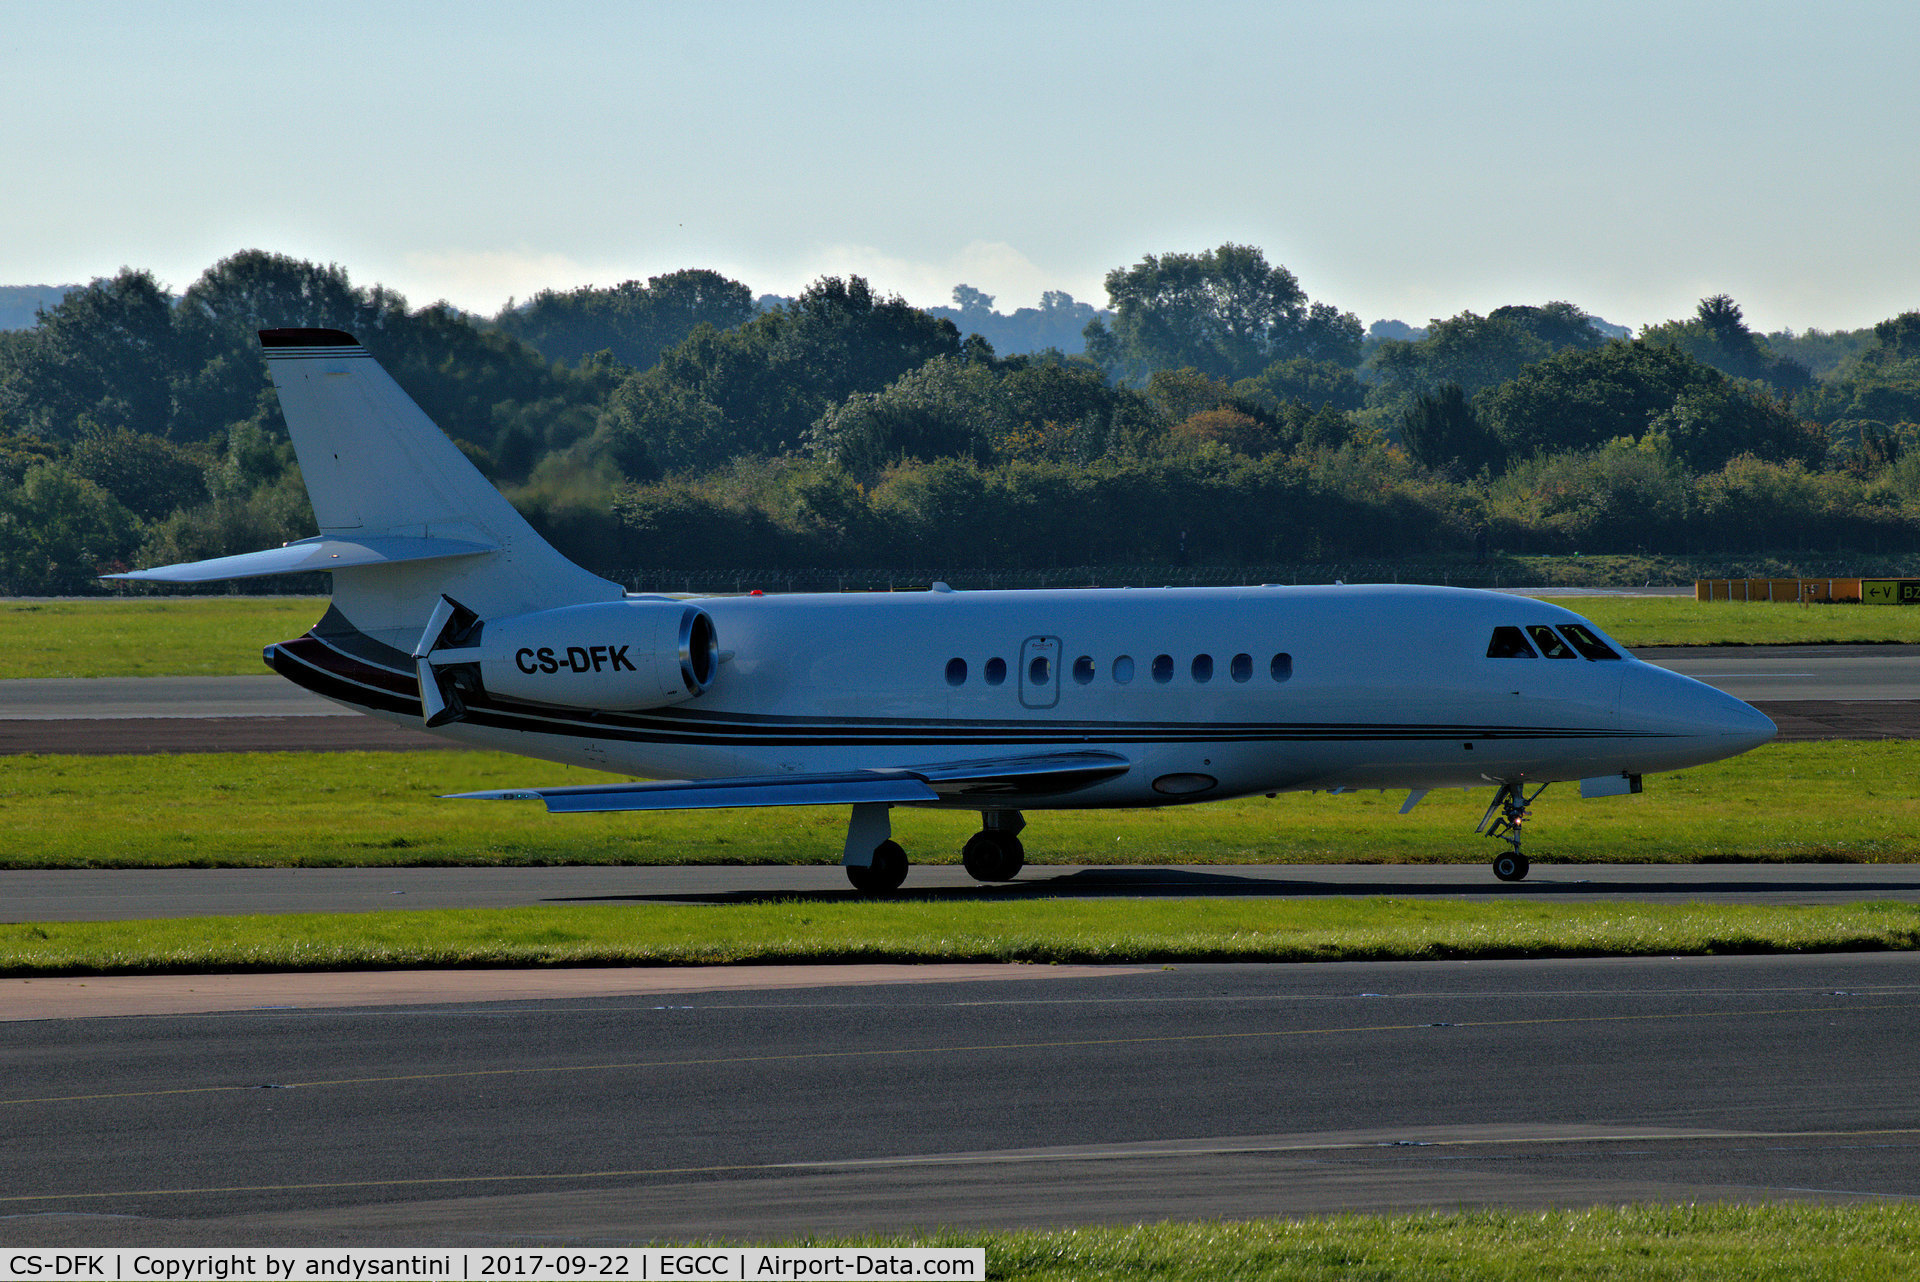 CS-DFK, 2006 Dassault Falcon 2000EX C/N 65, just left runway [23R] now taxing in to the [FBO exc ramp] at egcc uk.